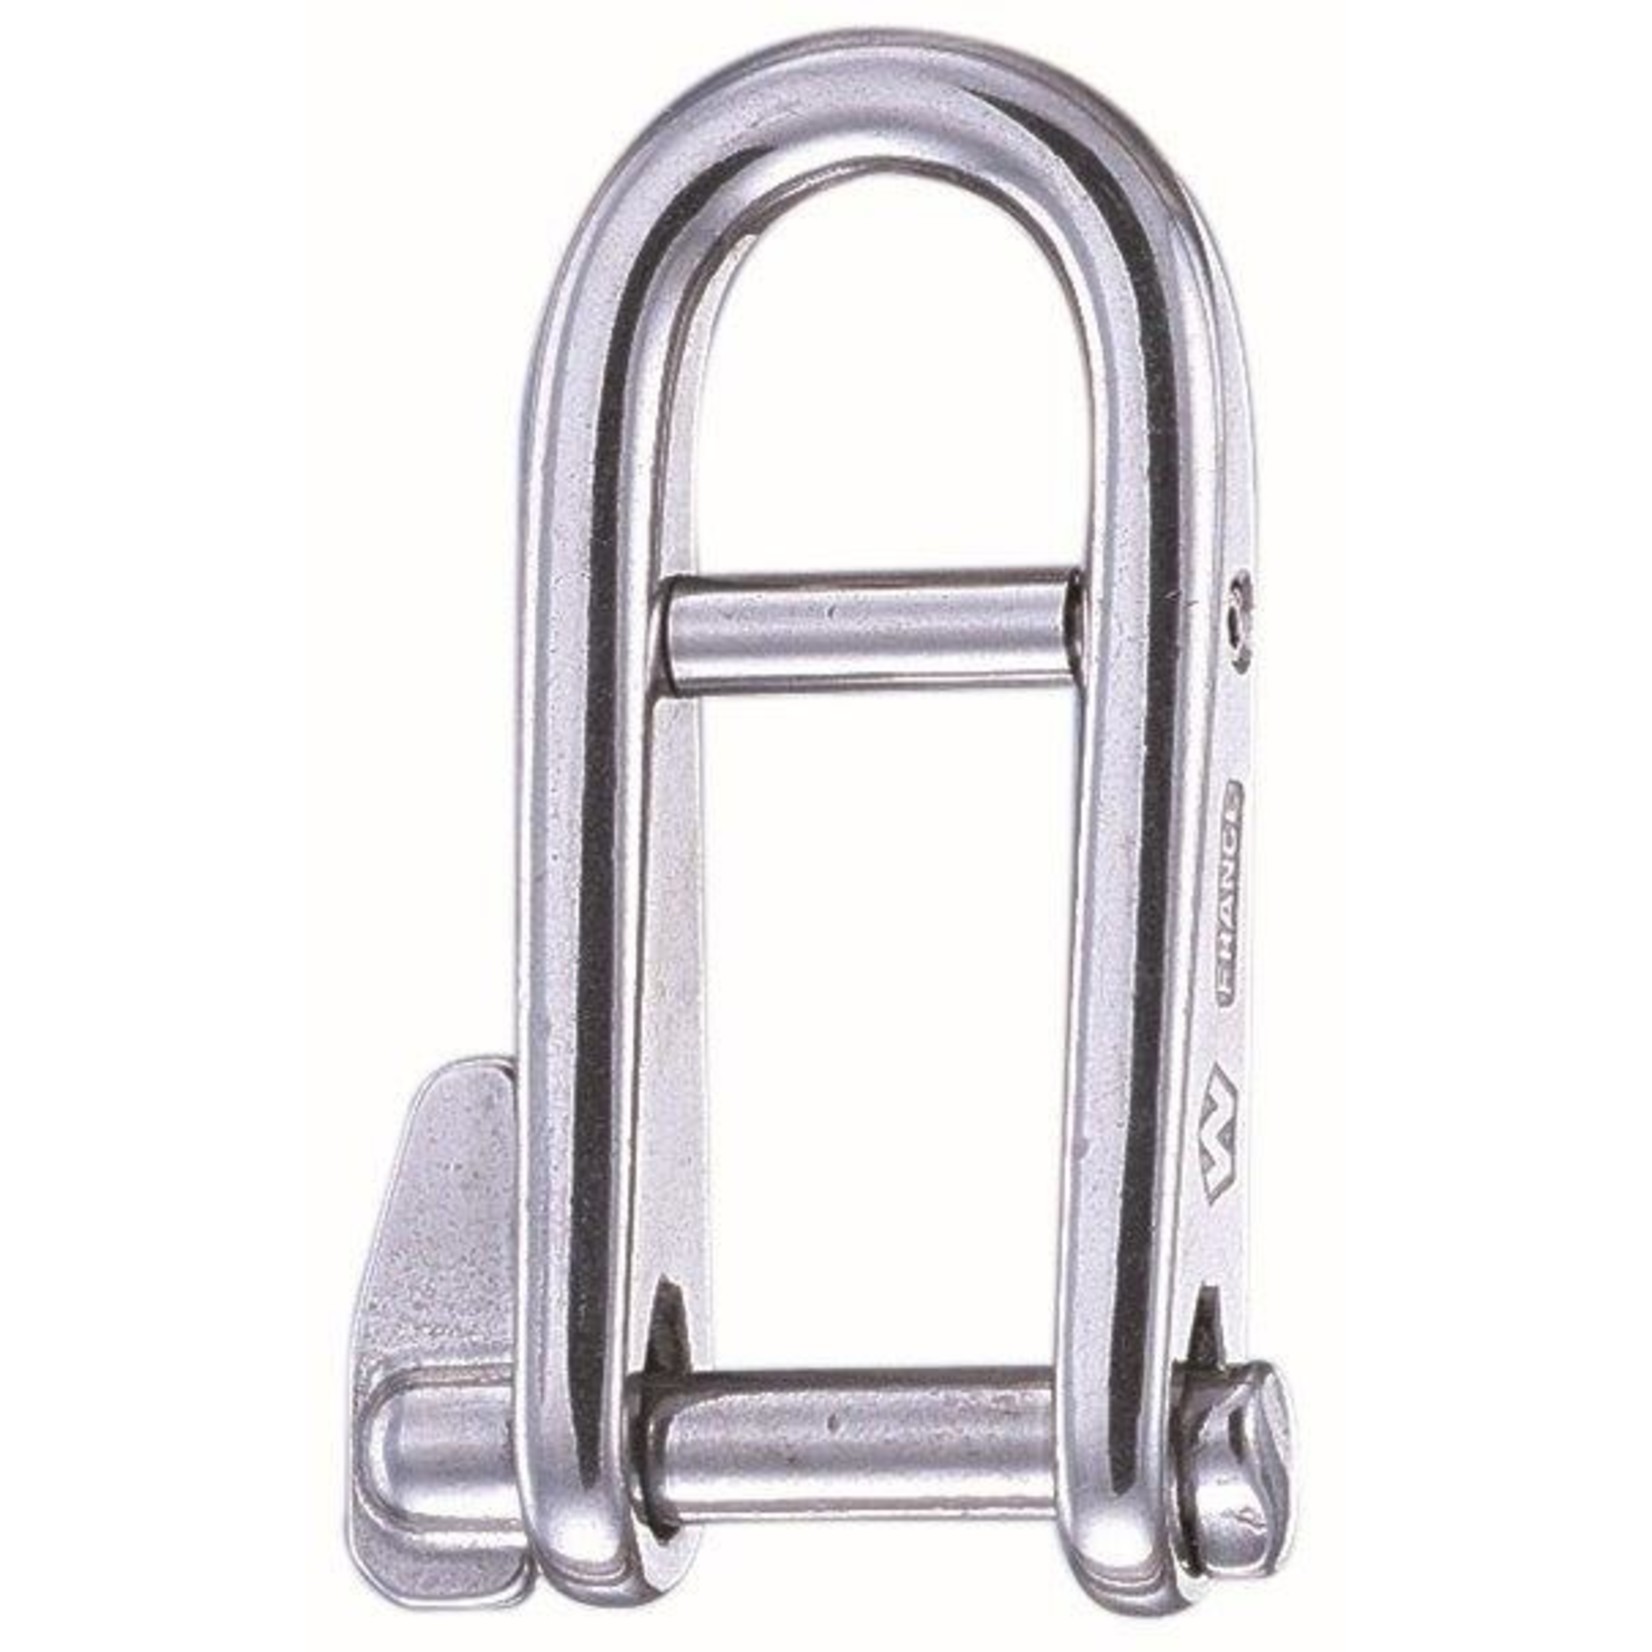 Wichard Key pin shackle with bar - Dia 8 mm